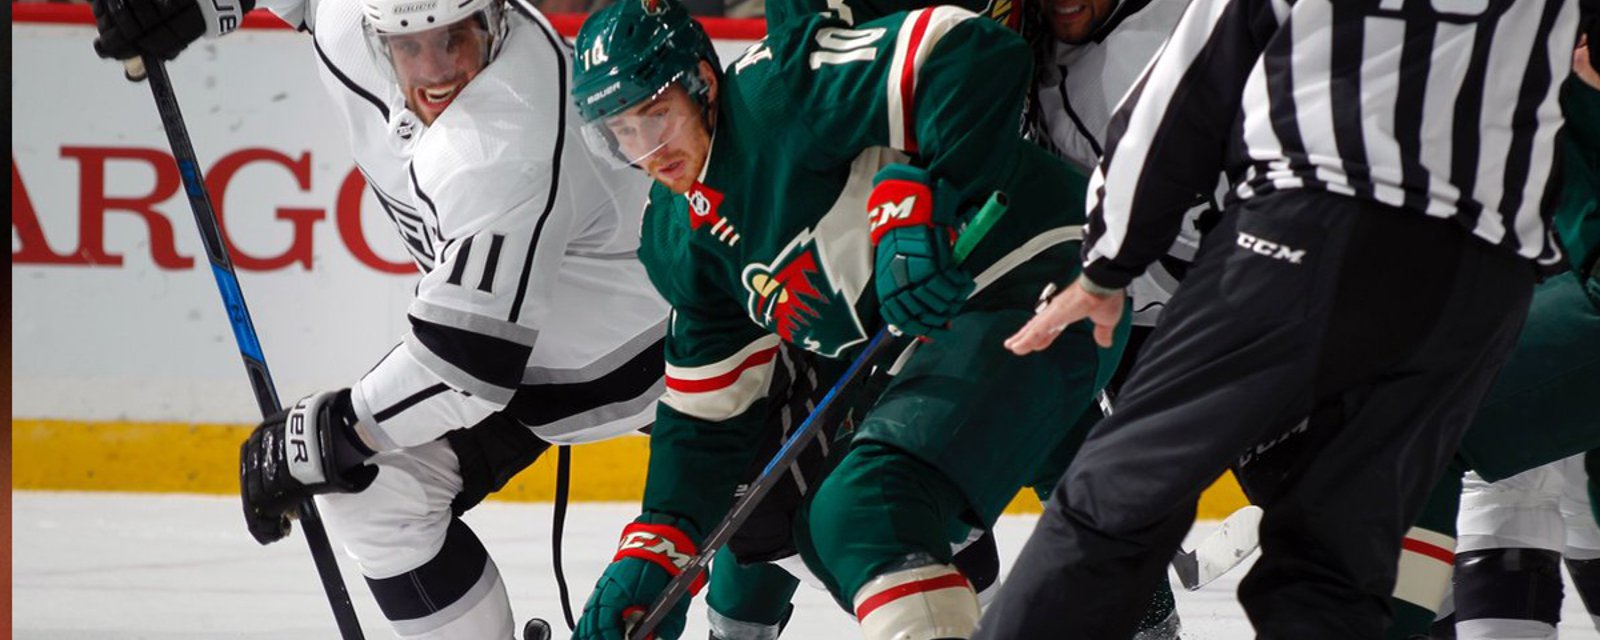 Breaking: Staal and Hendricks out, Wild forced to make AHL call up